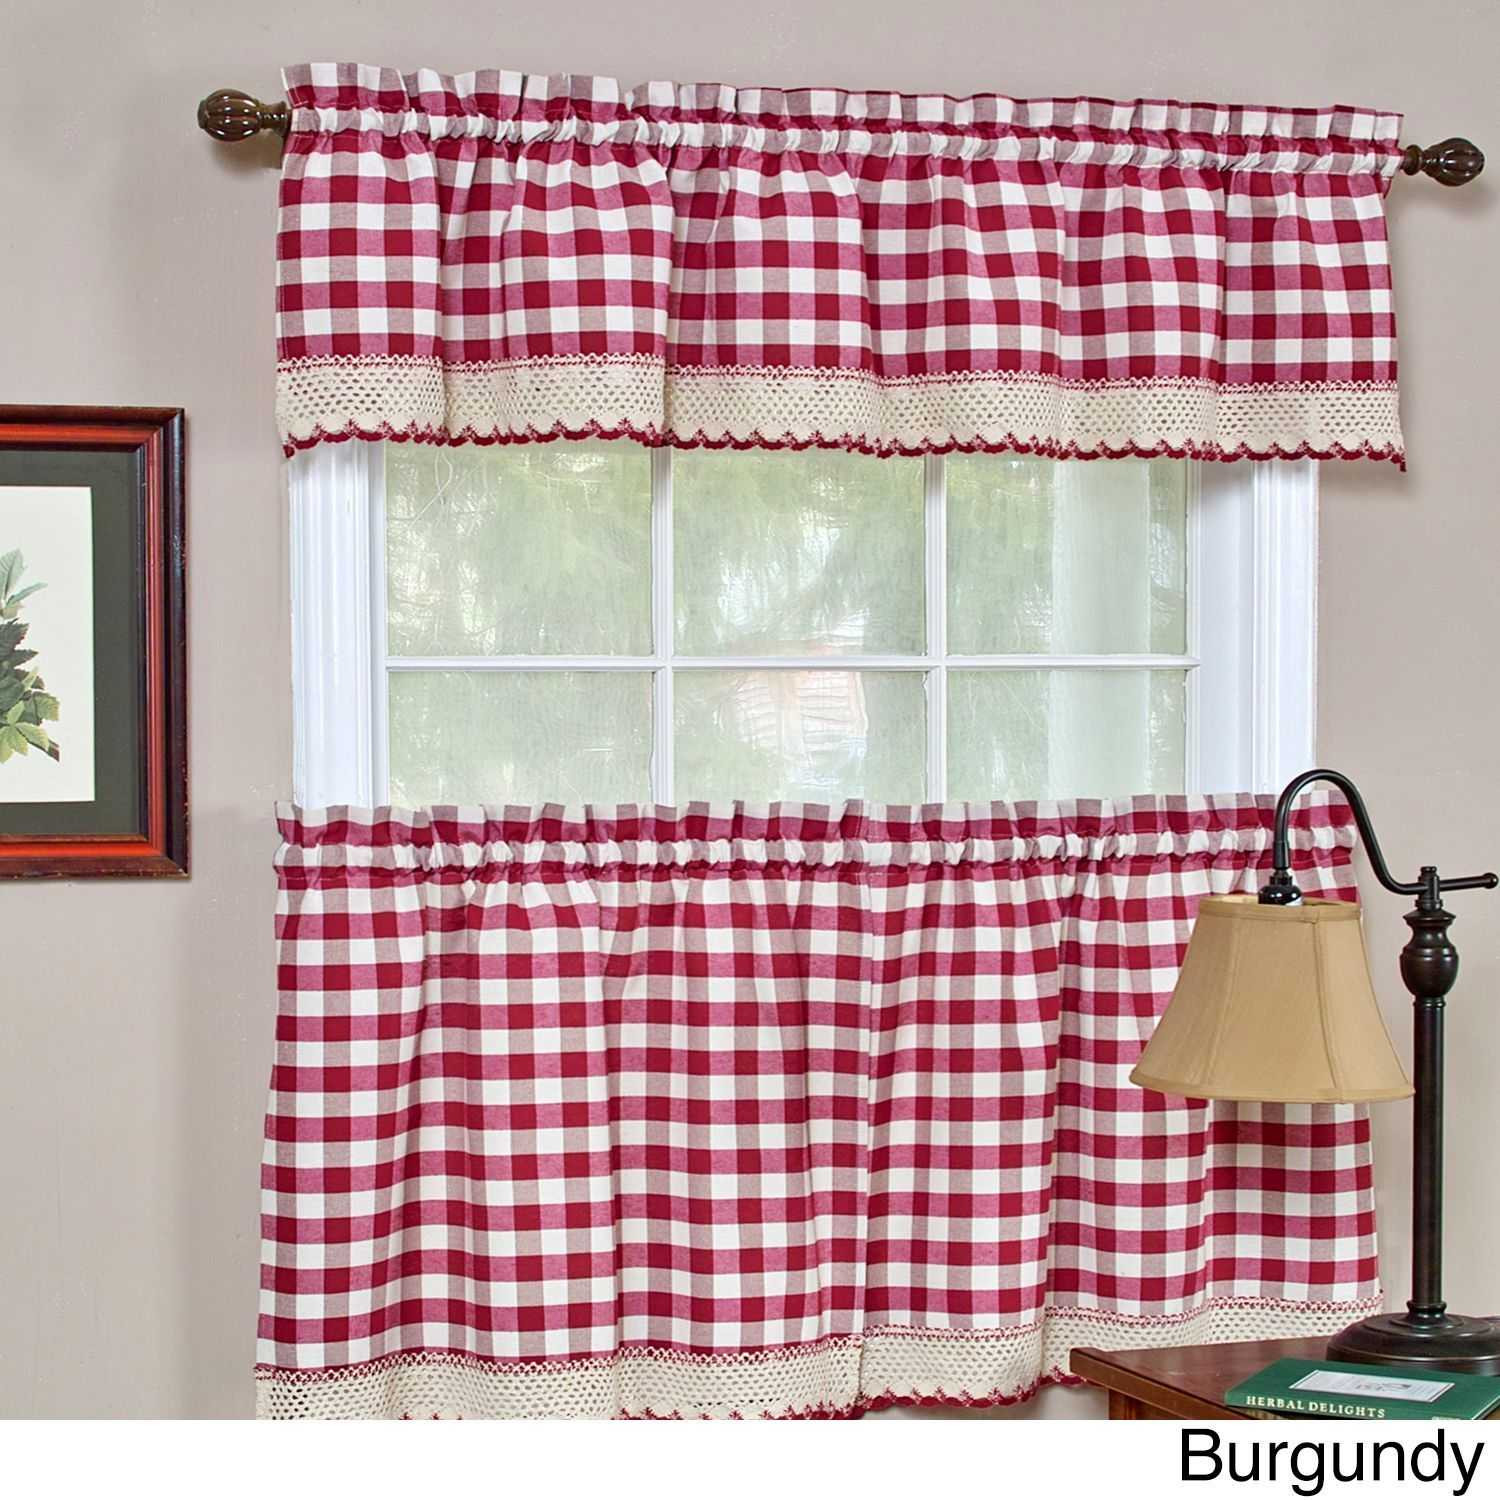 Red Checkered Kitchen Curtains
 Attractive Red Gingham Kitchen Curtains Ideas With Chair